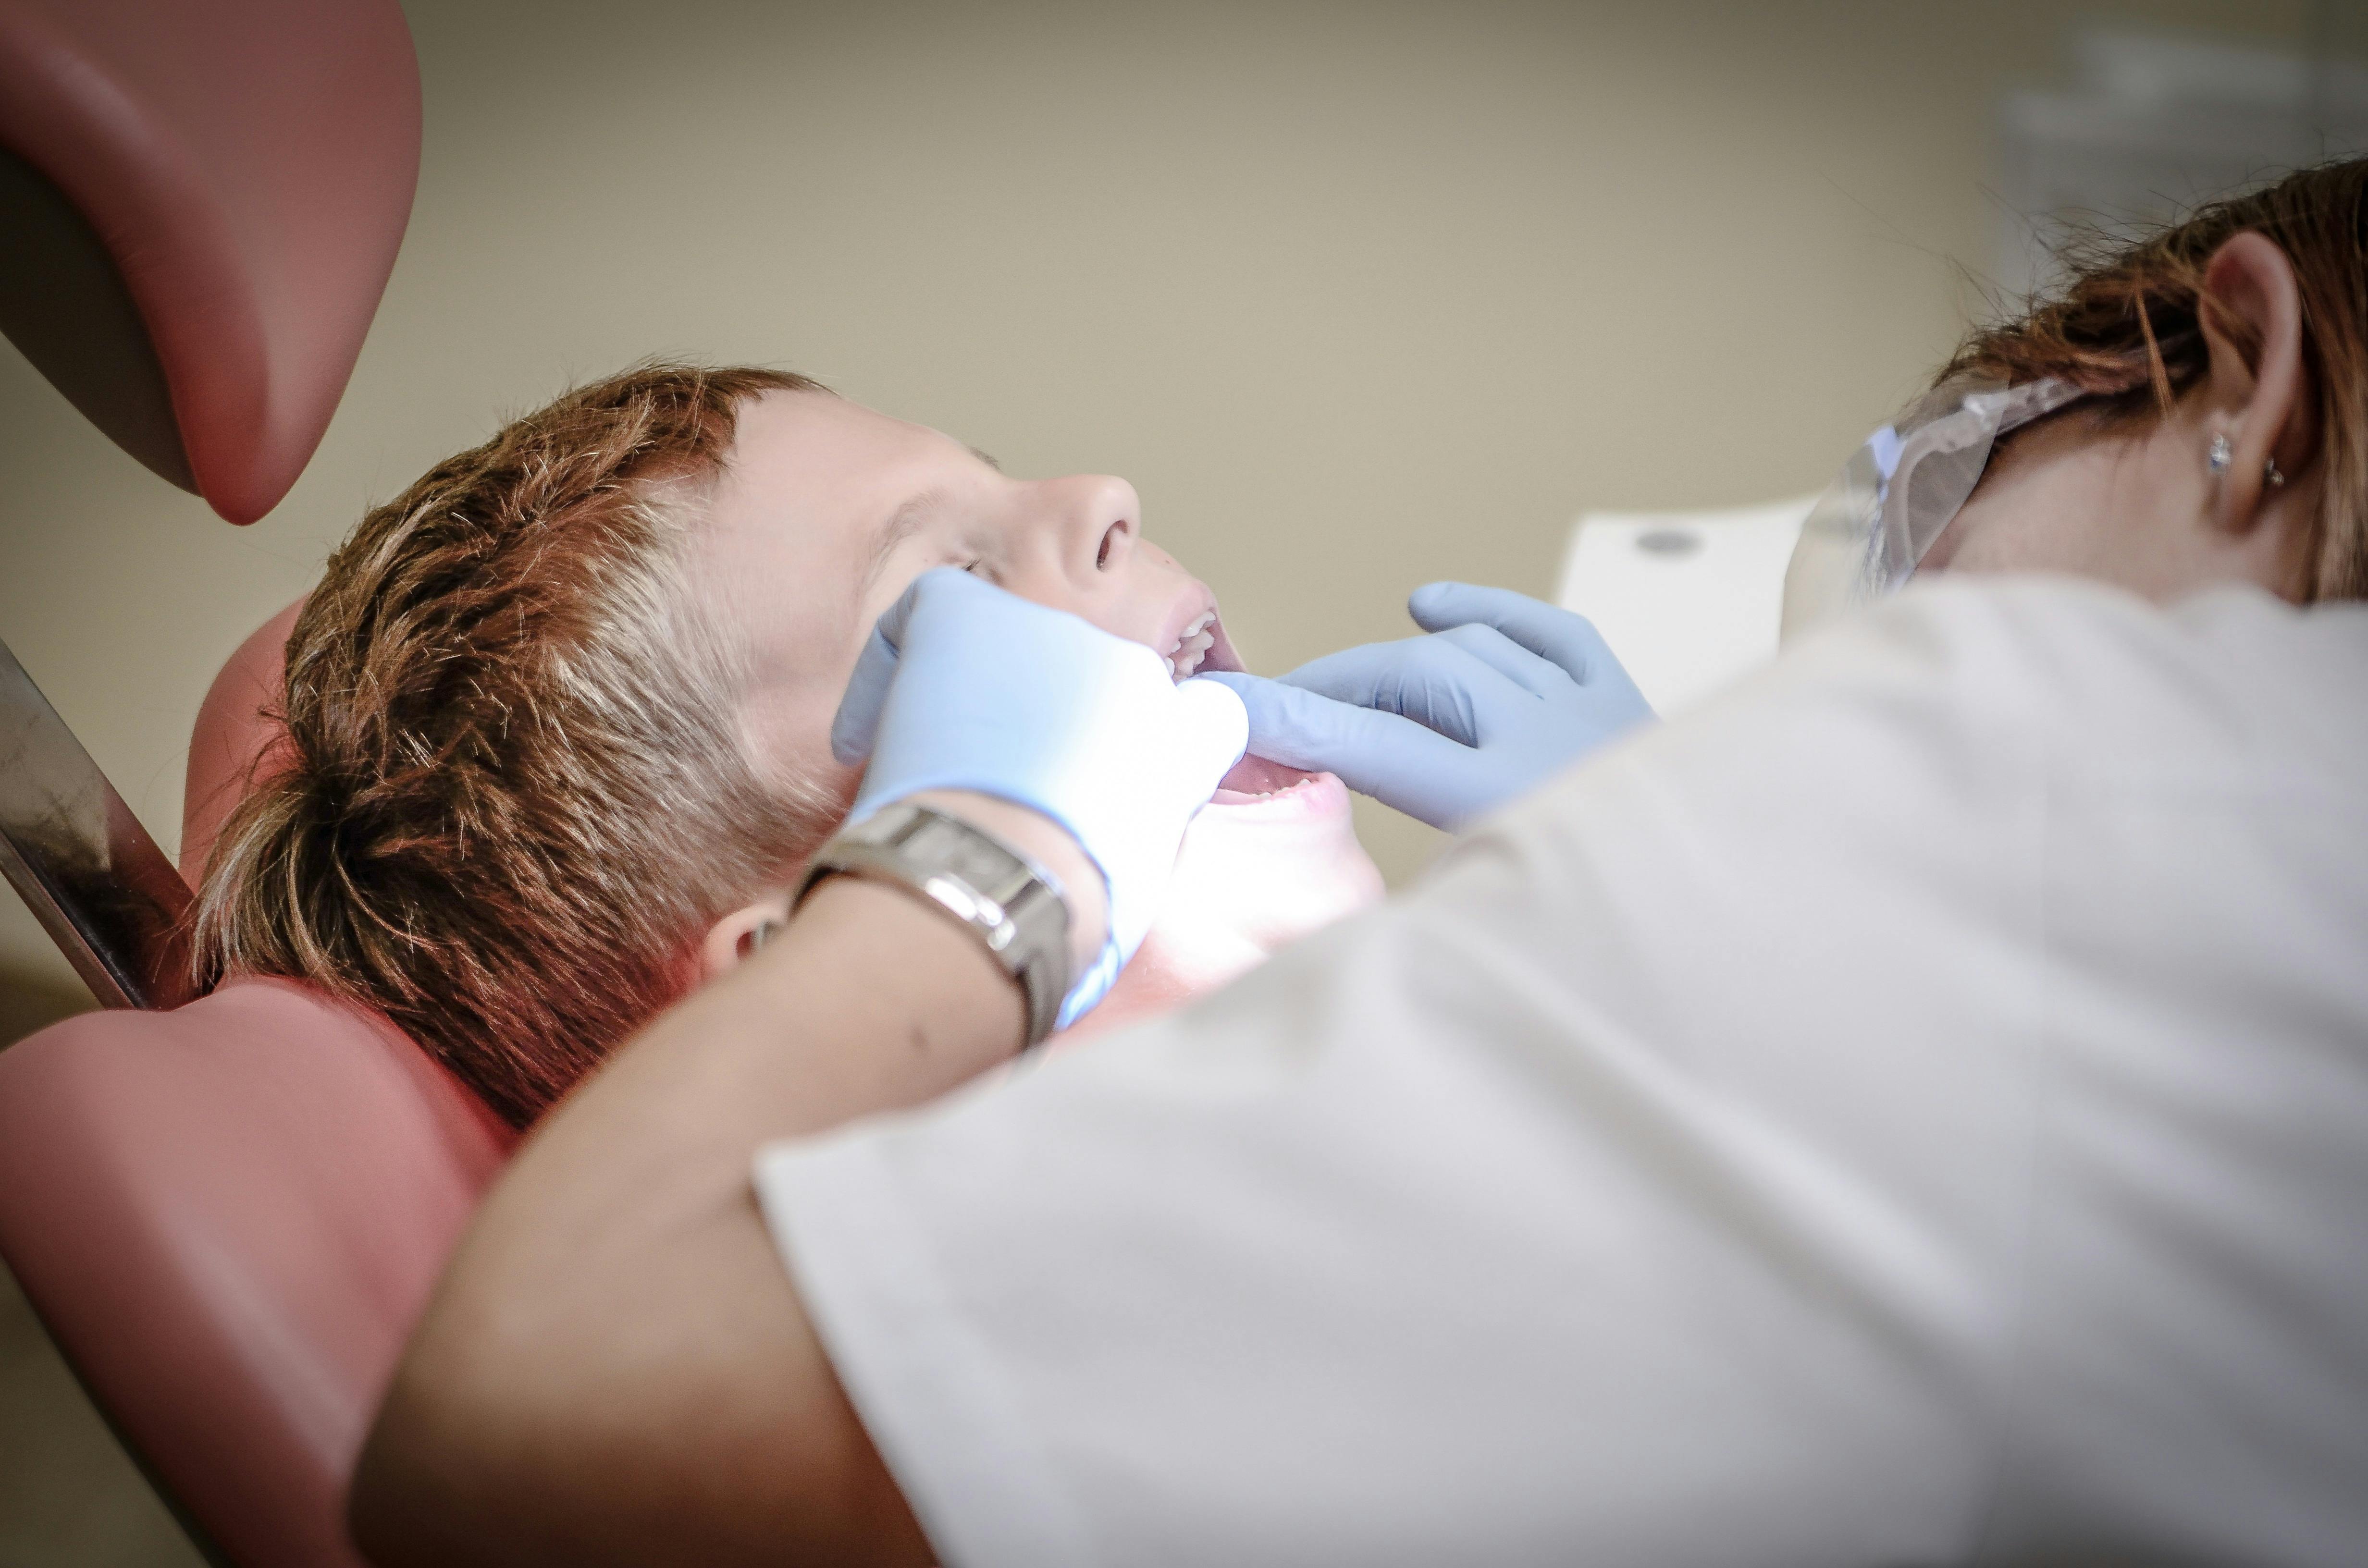 How Do Dental Hygienists Alter Their Technique For Young Children?